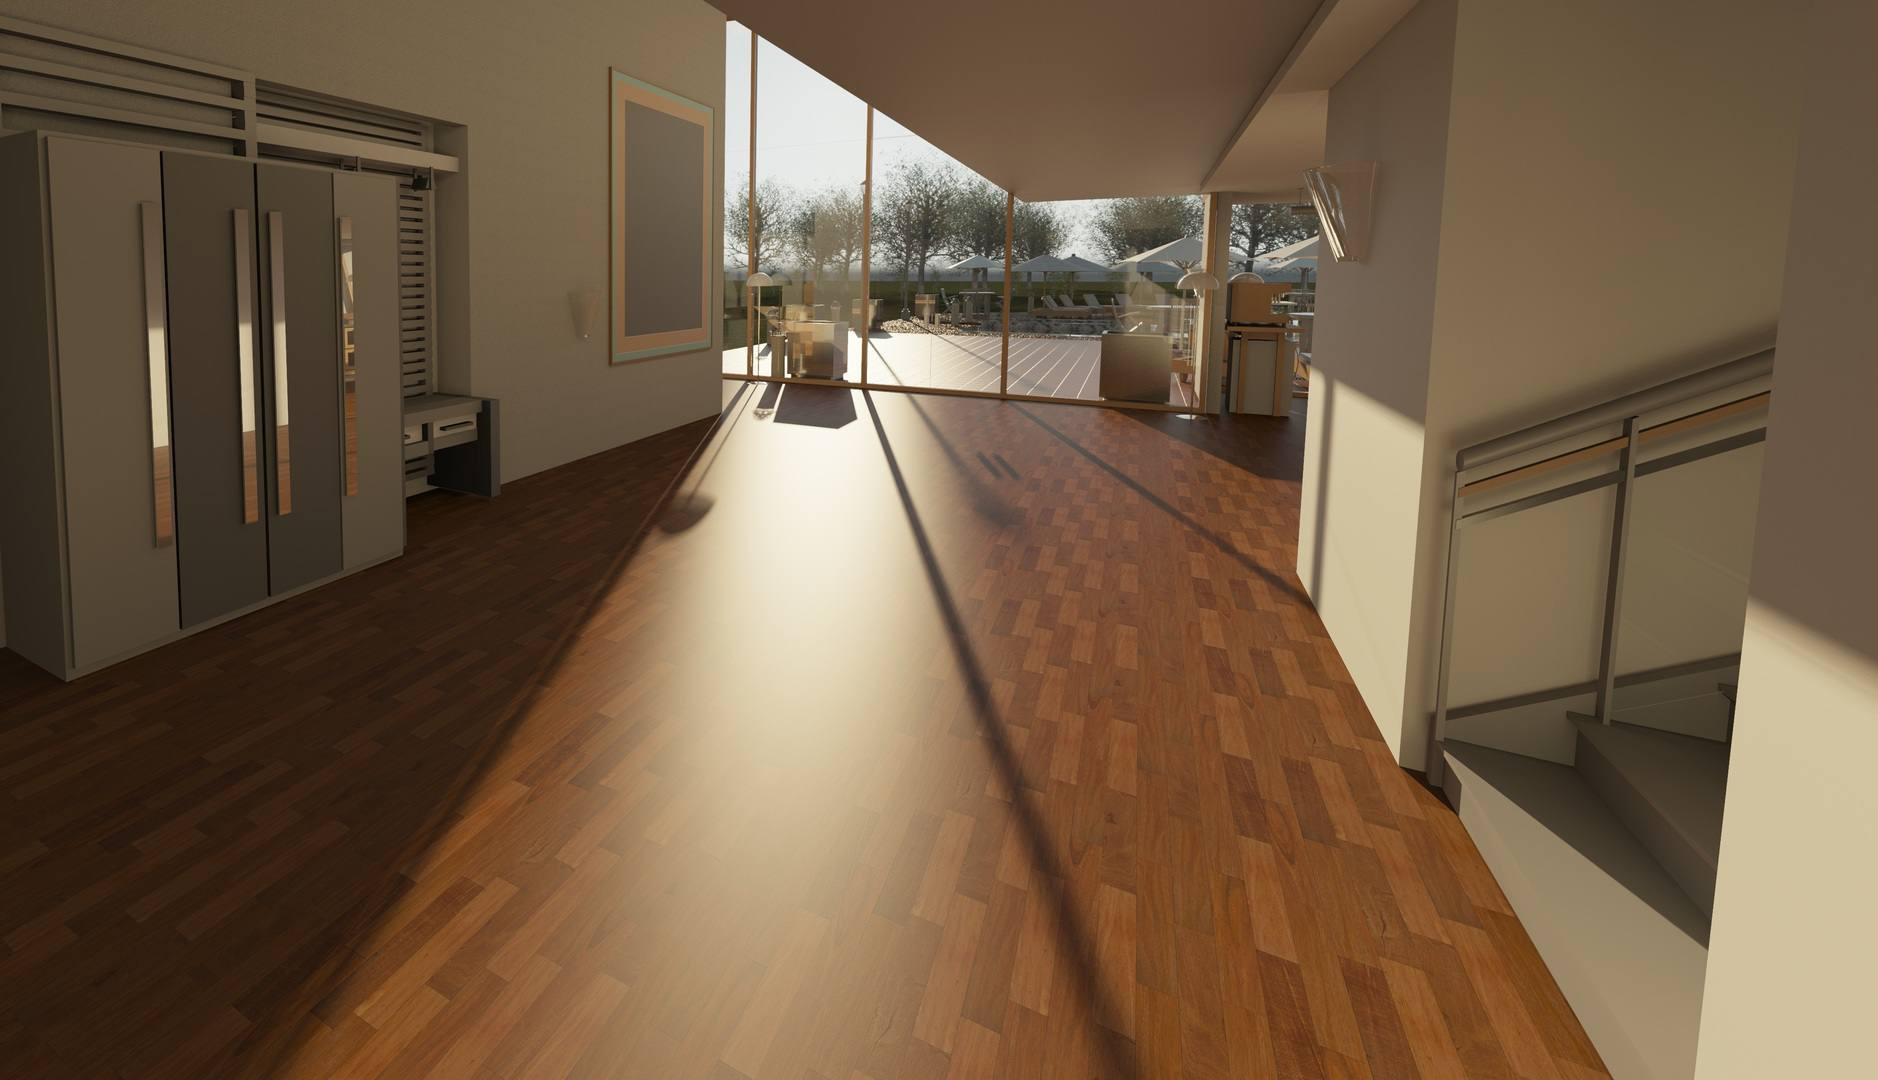 13 Unique Floating Hardwood Floor Reviews 2024 free download floating hardwood floor reviews of common flooring types currently used in renovation and building with architecture wood house floor interior window 917178 pxhere com 5ba27a2cc9e77c00503b27